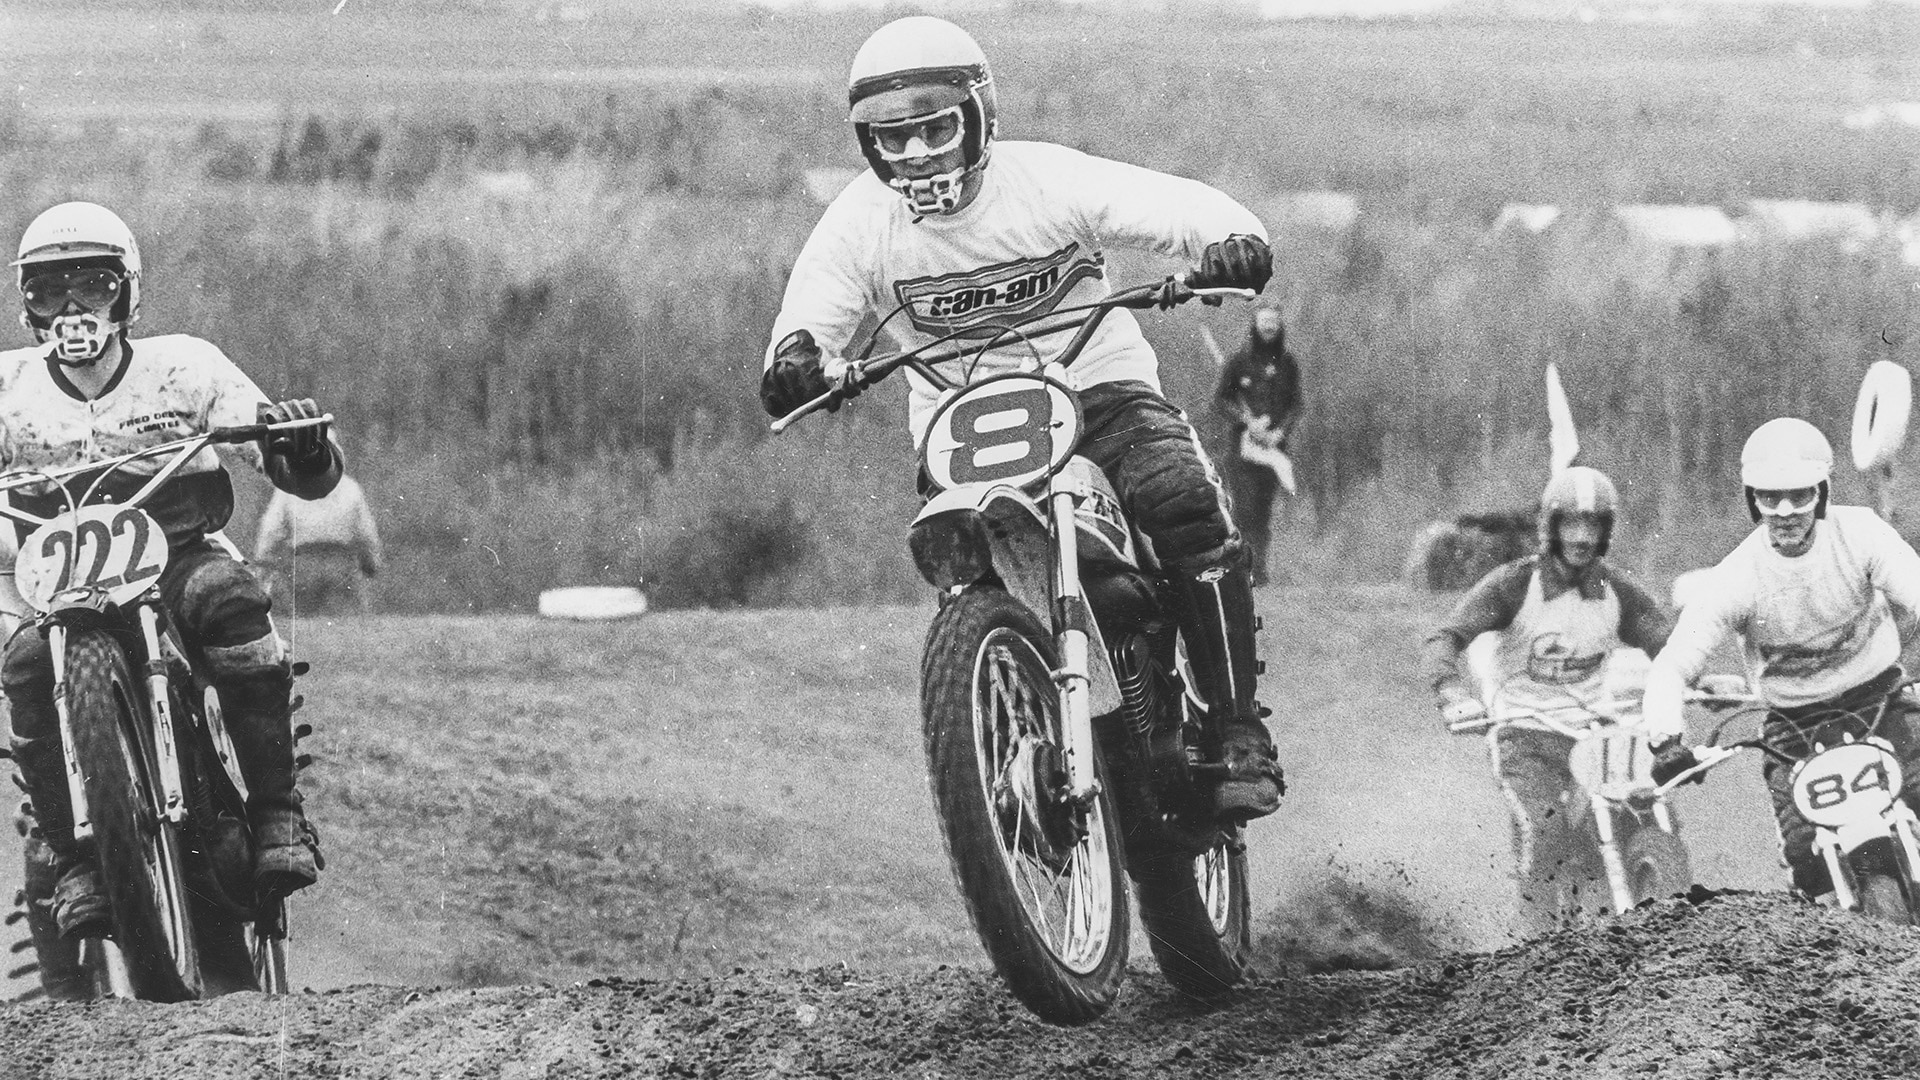 Racer driving a Can-Am motocross leading the pack of the race